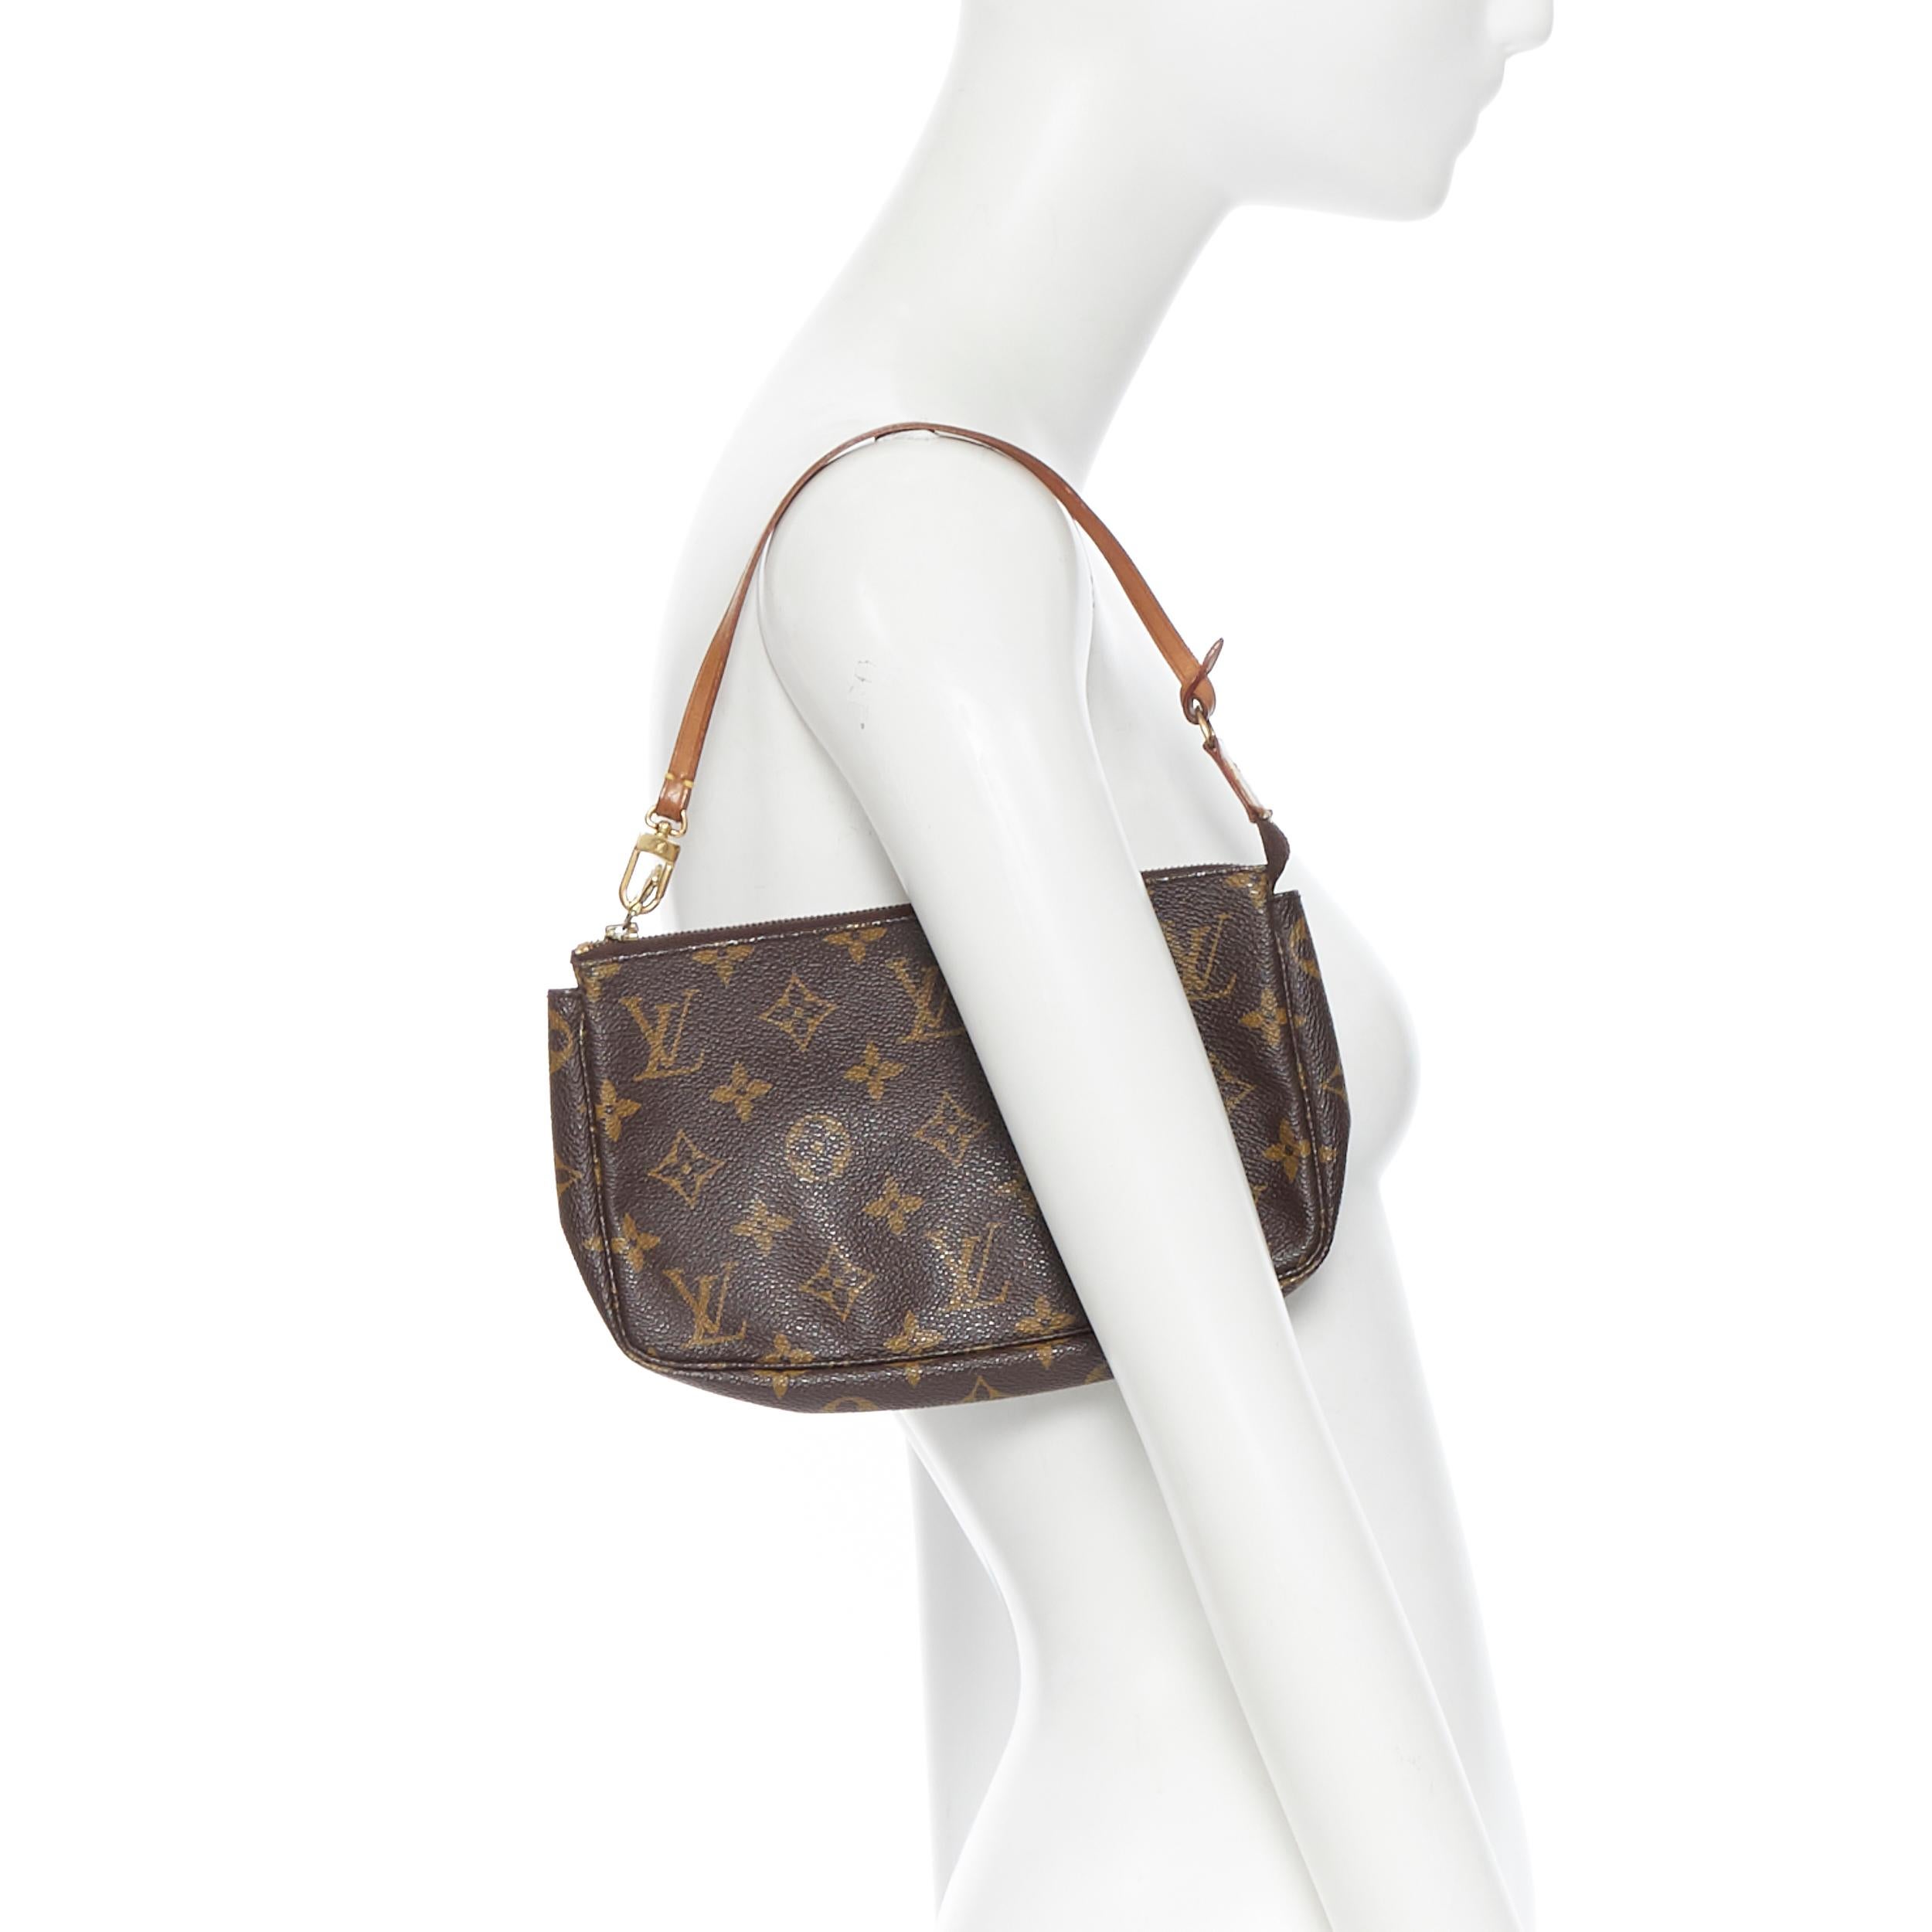 vintage LOUIS VUITTON monogram logo canvas leather trimmed top zip pouch bag 
Brand: Louis Vuitton
Designer: Louis Vuitton
Model Name / Style: Top zip pouch
Material: Other; coated canvas
Color: Brown
Pattern: Other
Closure: Zip
Extra Detail: Code: